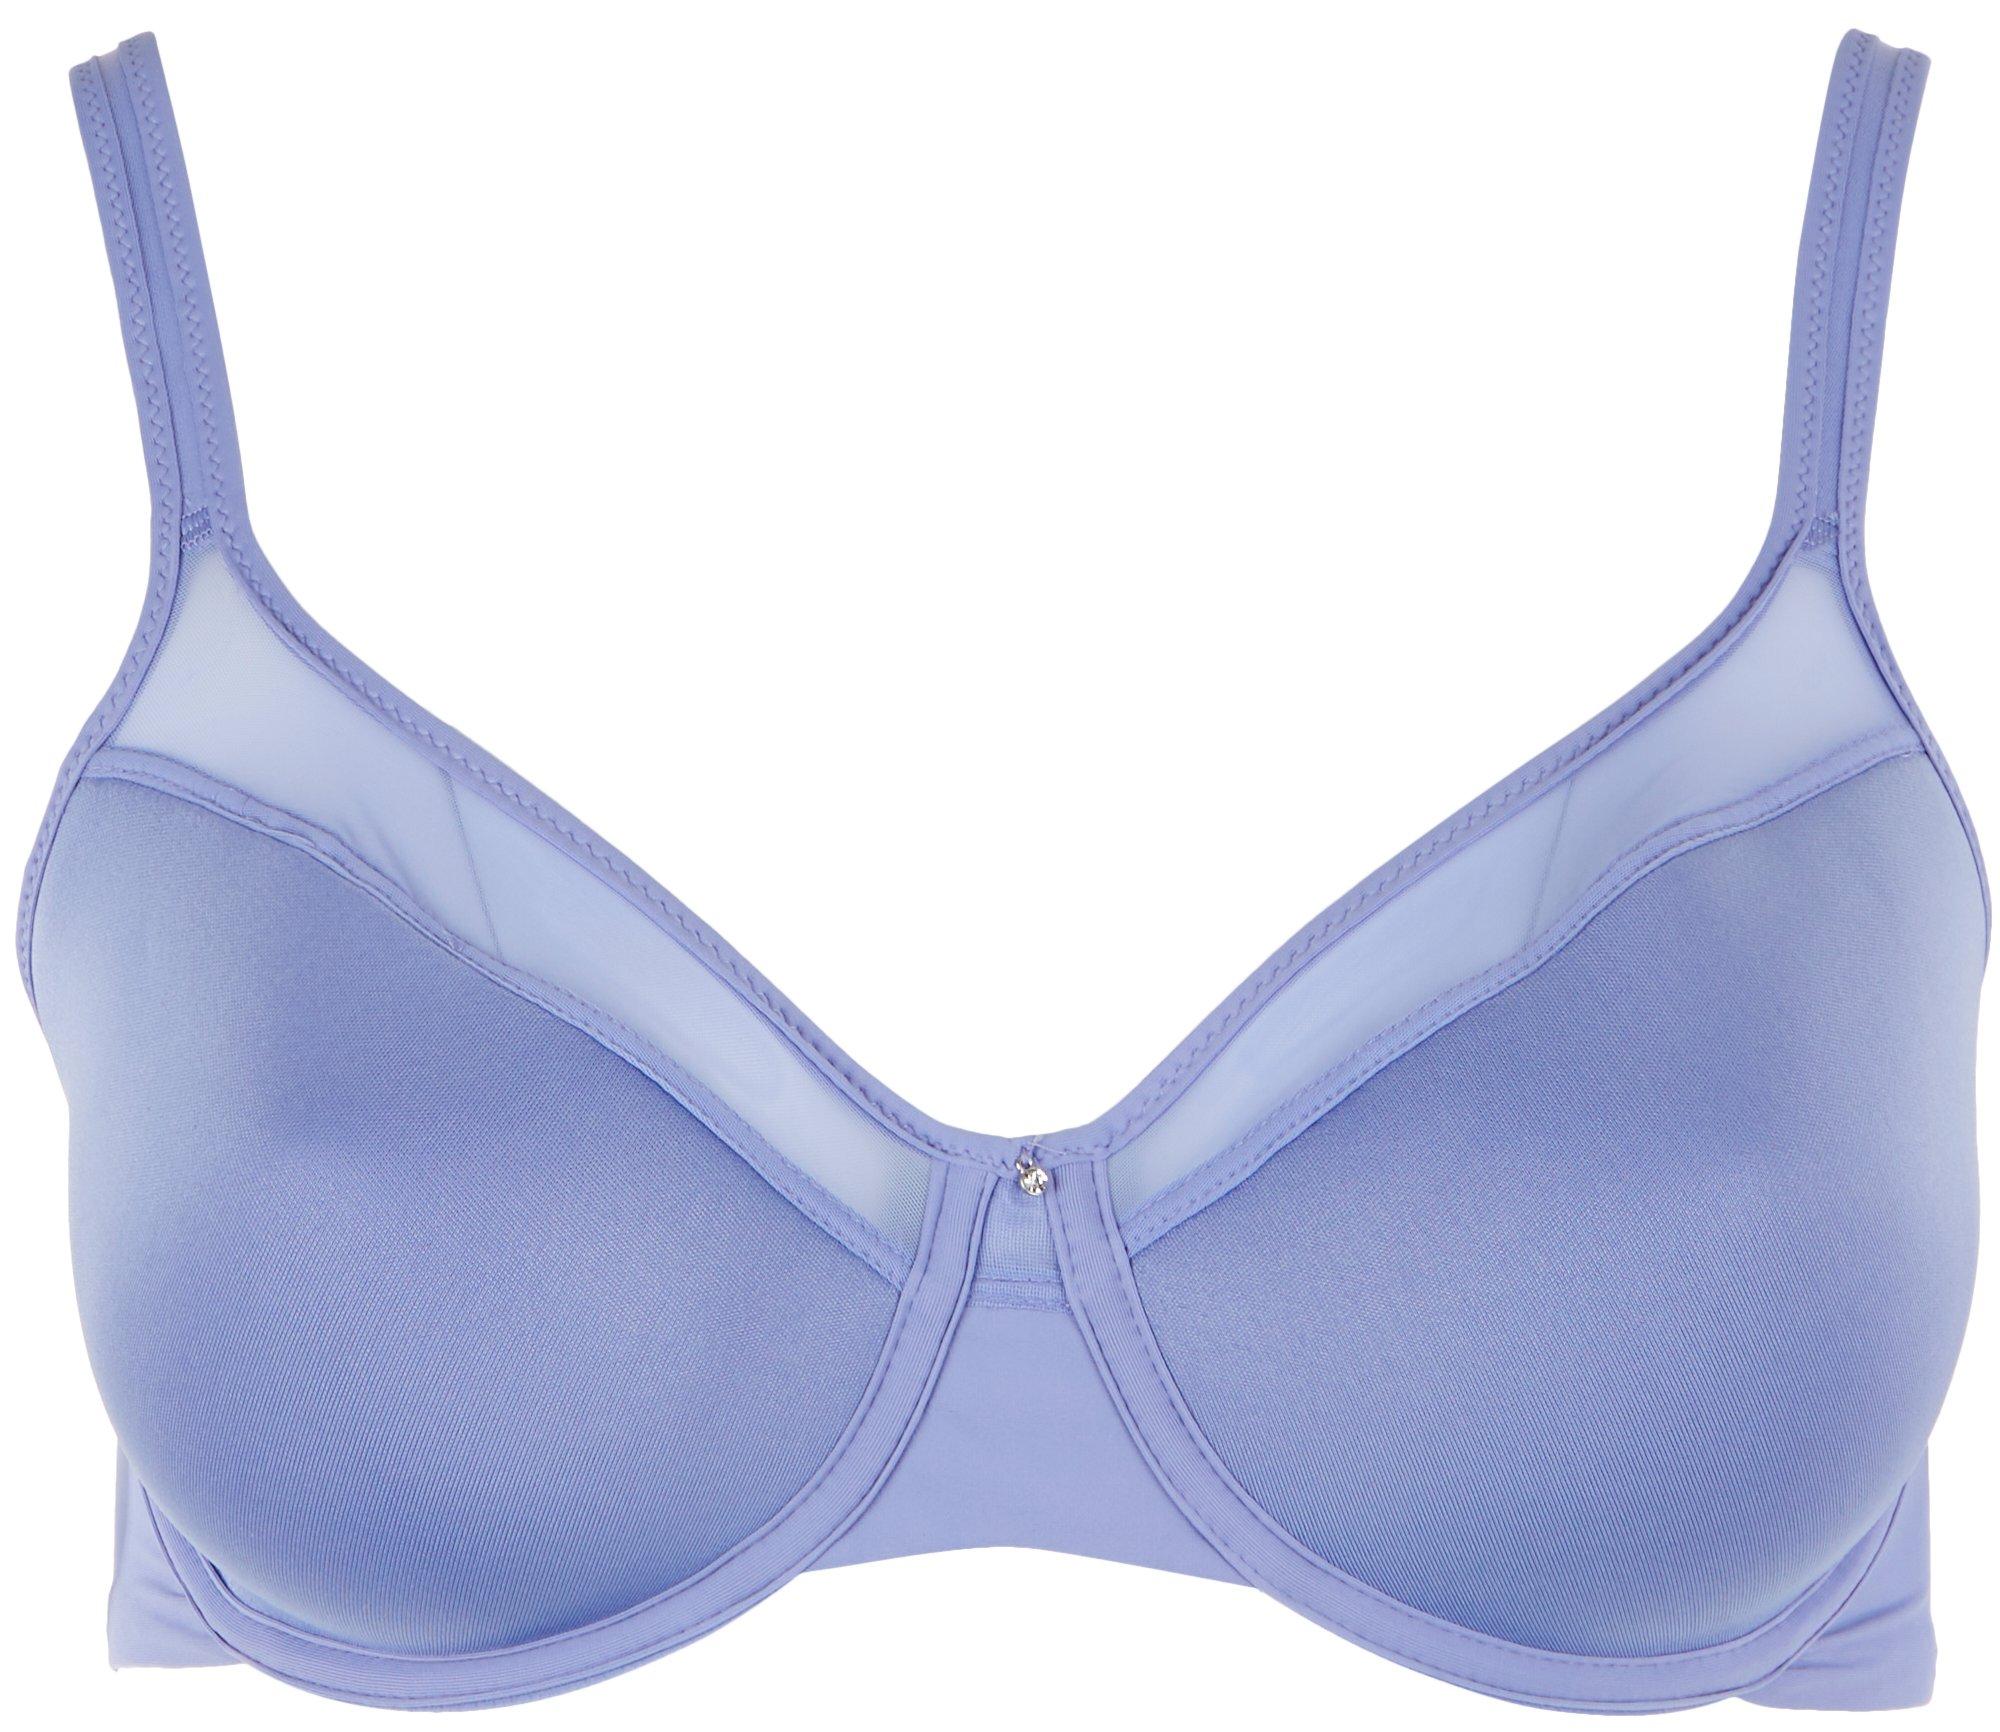 Bali One Smooth U® Ultra Light Spacer Underwire Bra with Open